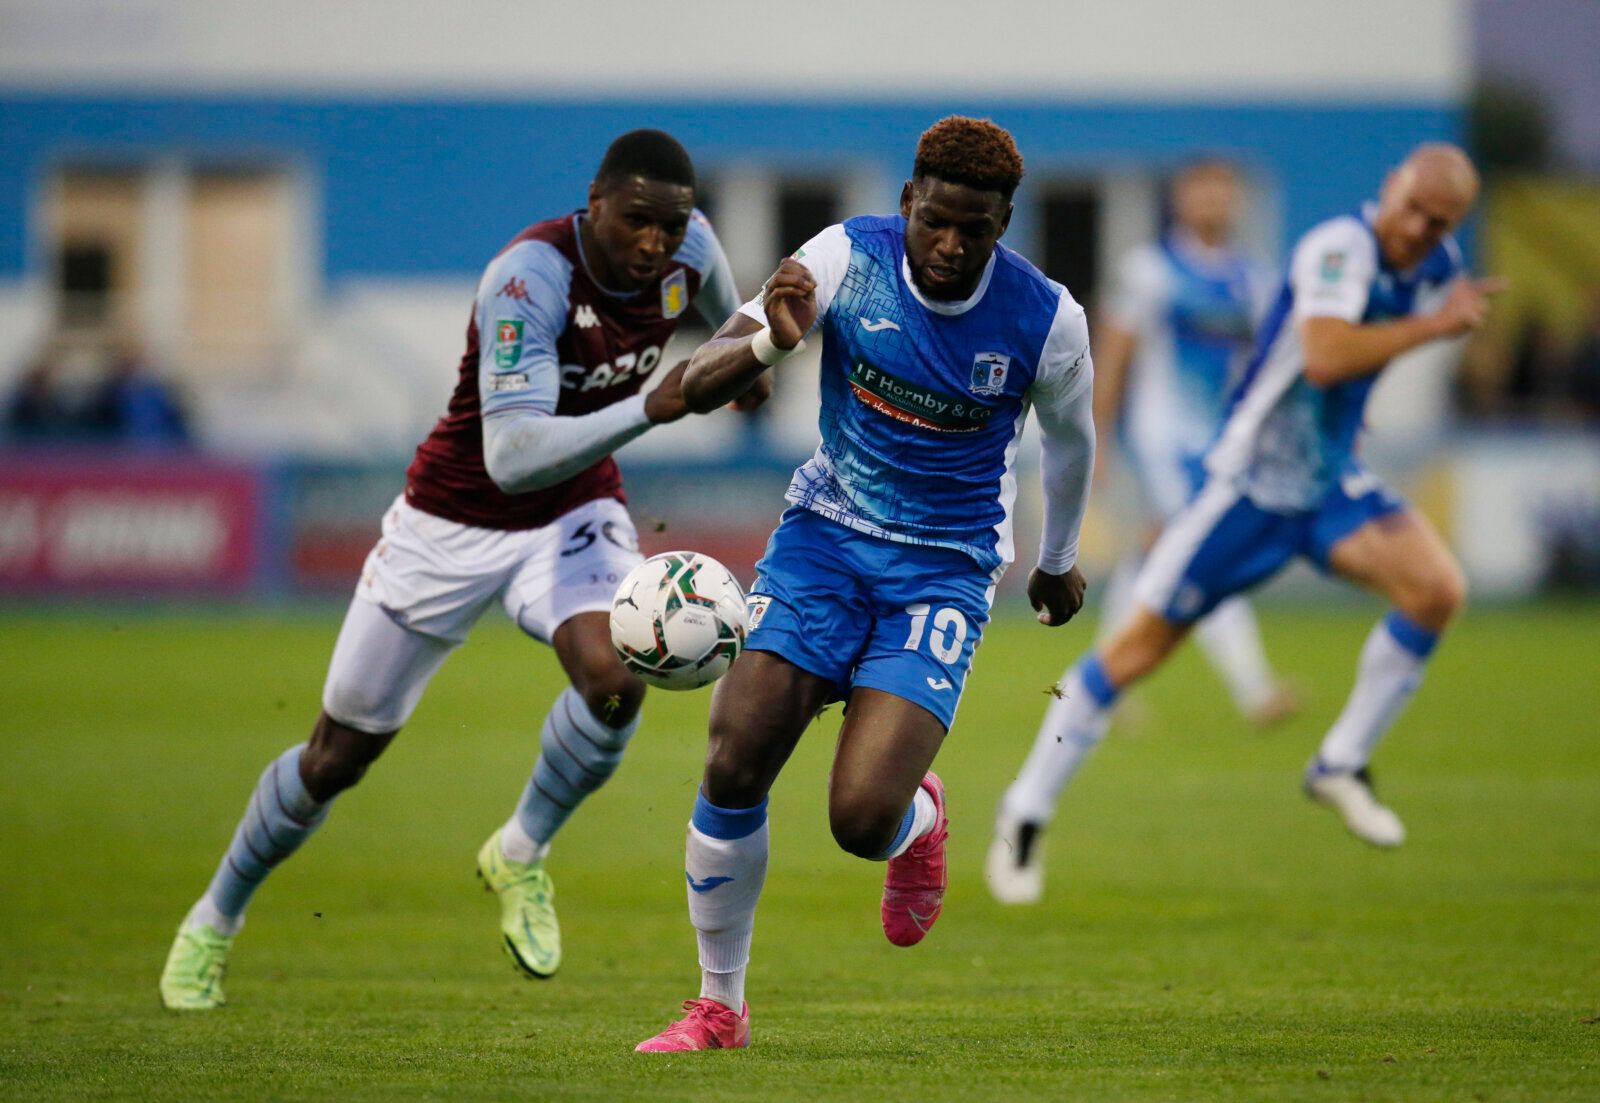 Soccer - England - Carabao Cup Second Round - Barrow v Aston Villa - Holker Street, Barrow-in-Furness, Britain - August 24, 2021 Aston Villa's Kortney Hause in action with Barrow's Offrande Zanzala Action Images via Reuters/Ed Sykes